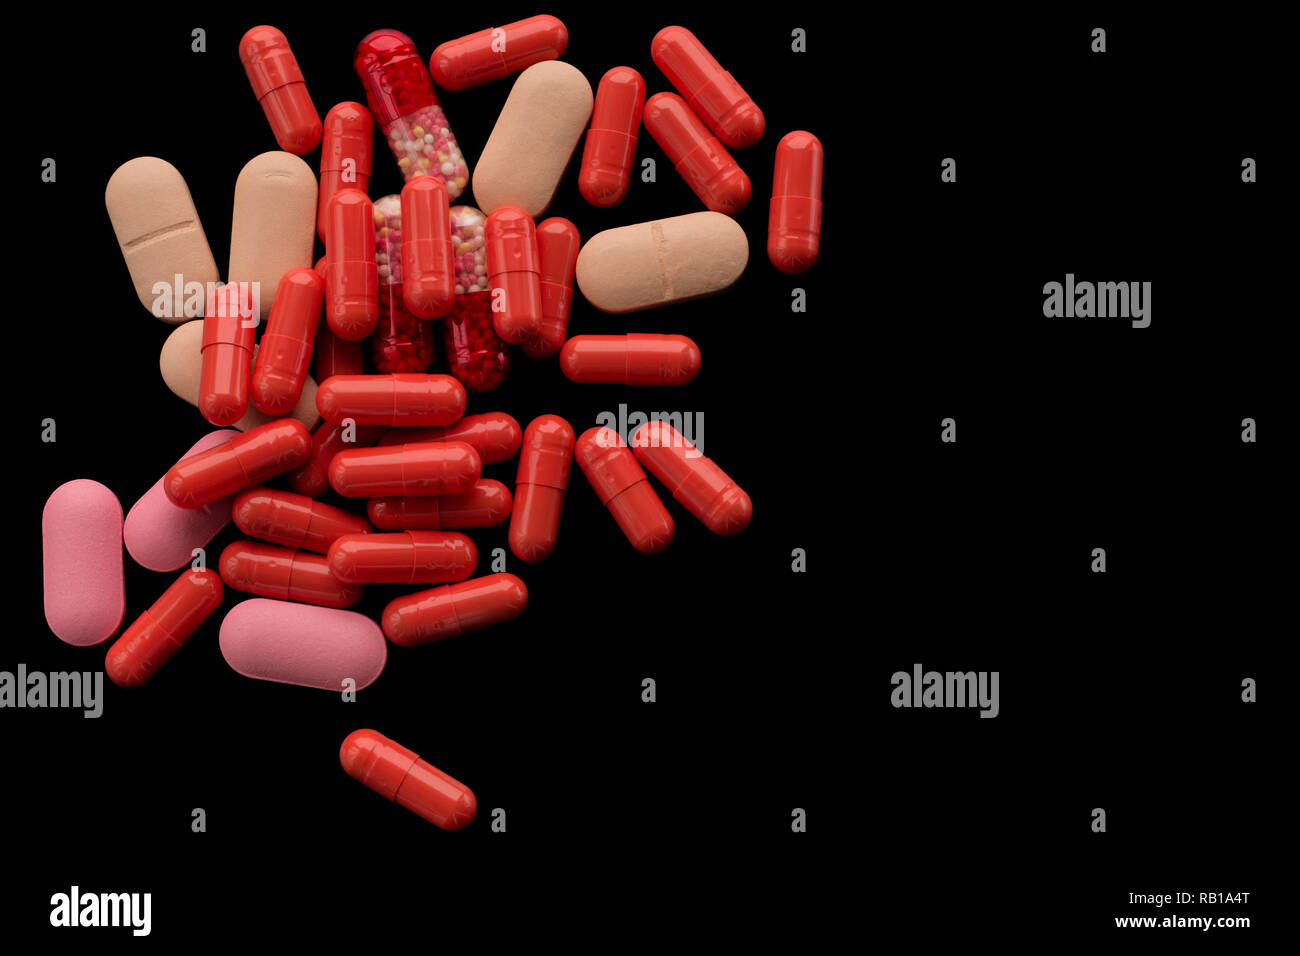 A pile of red, beige, pink tablets, pills or capsules on the black background. For medical, pharmaceutical topics, health care Stock Photo